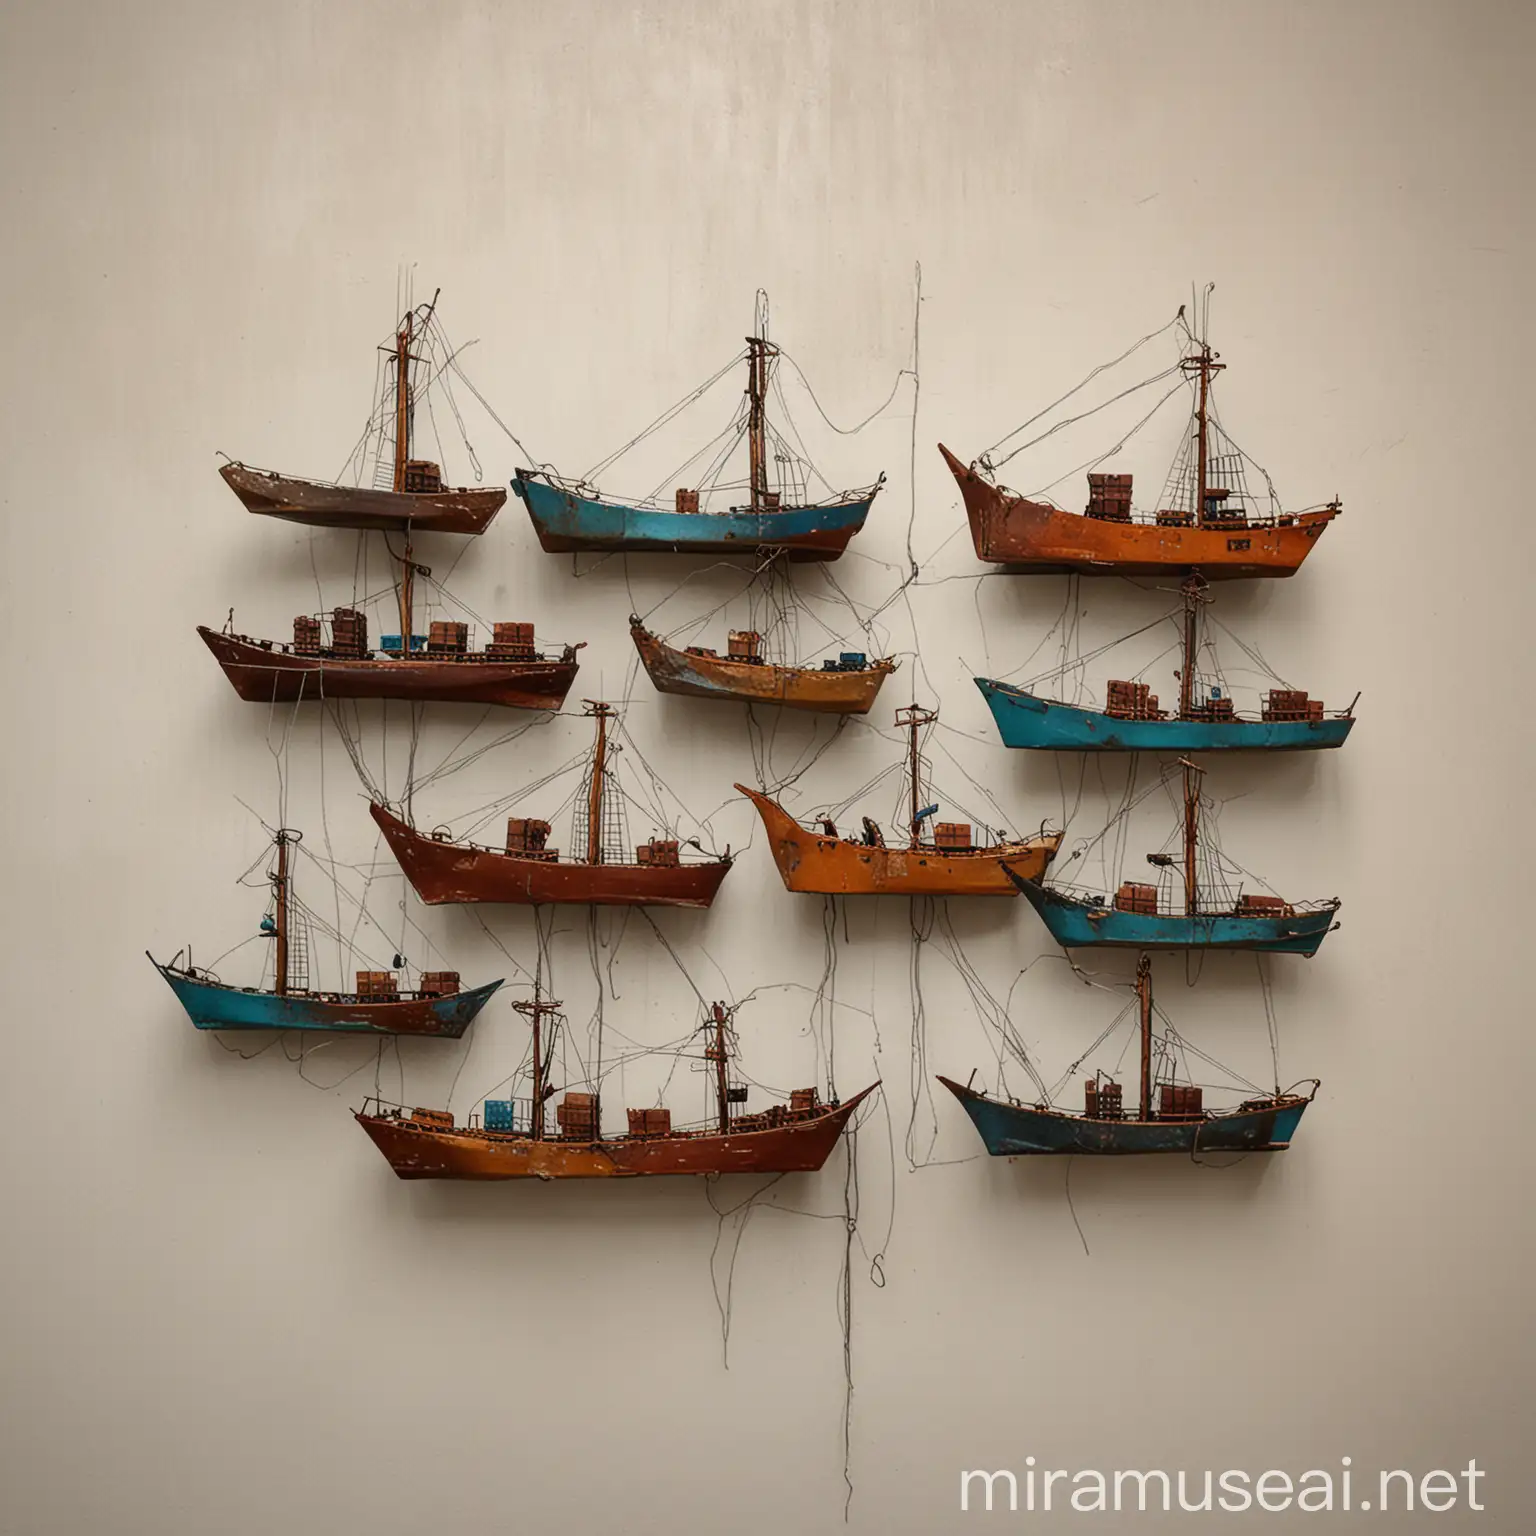 a wall sculpture- of group of gulf ships- abstracted - connected with wires - simple not too realistic - minimal design - metal rustic material - placed in a office 